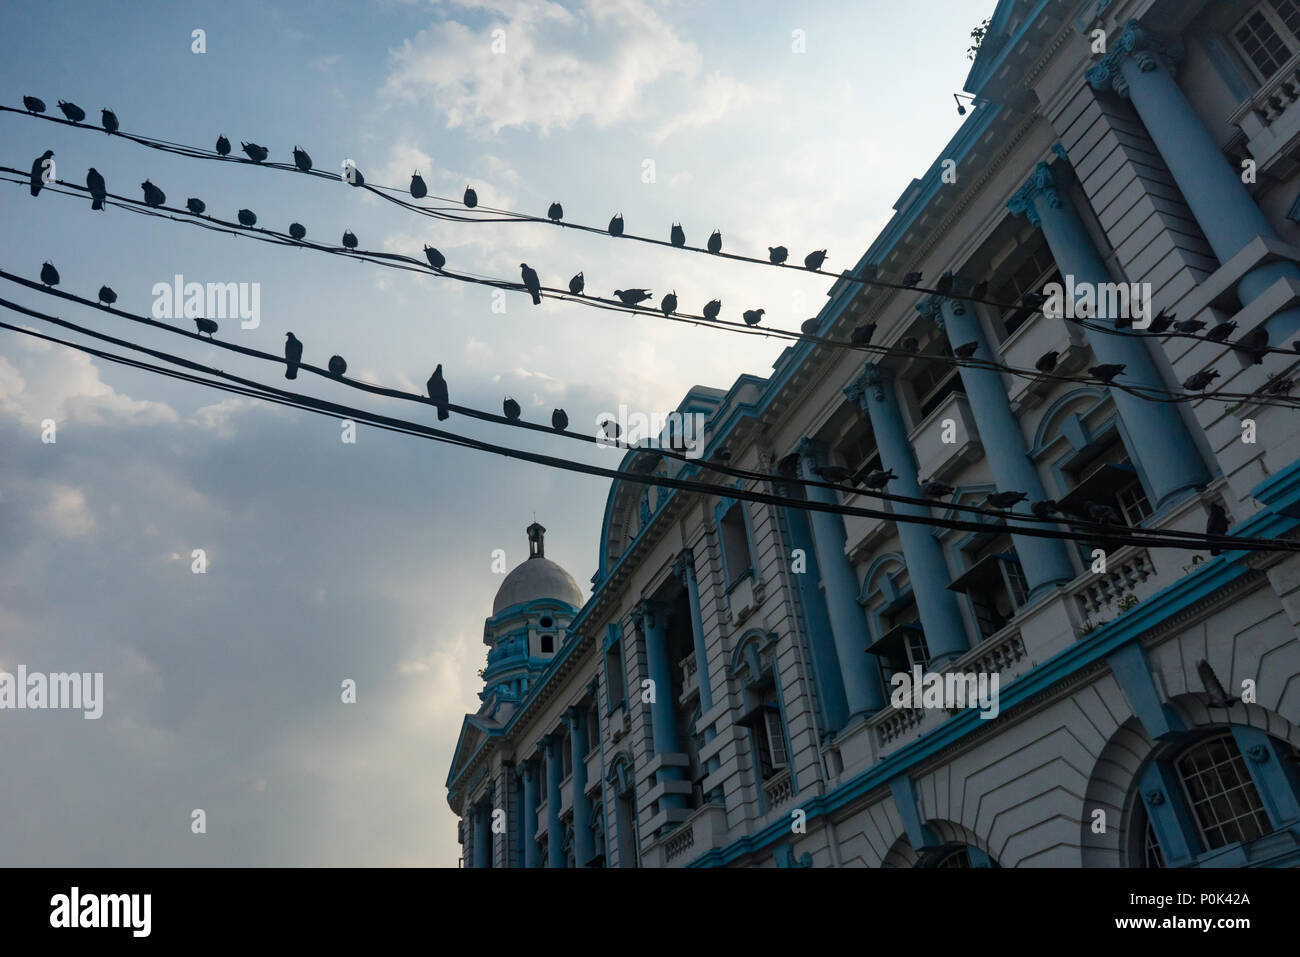 Pigeons on telephone wires against cloudy sky and colonial architecture in Yangon Myanmar Stock Photo